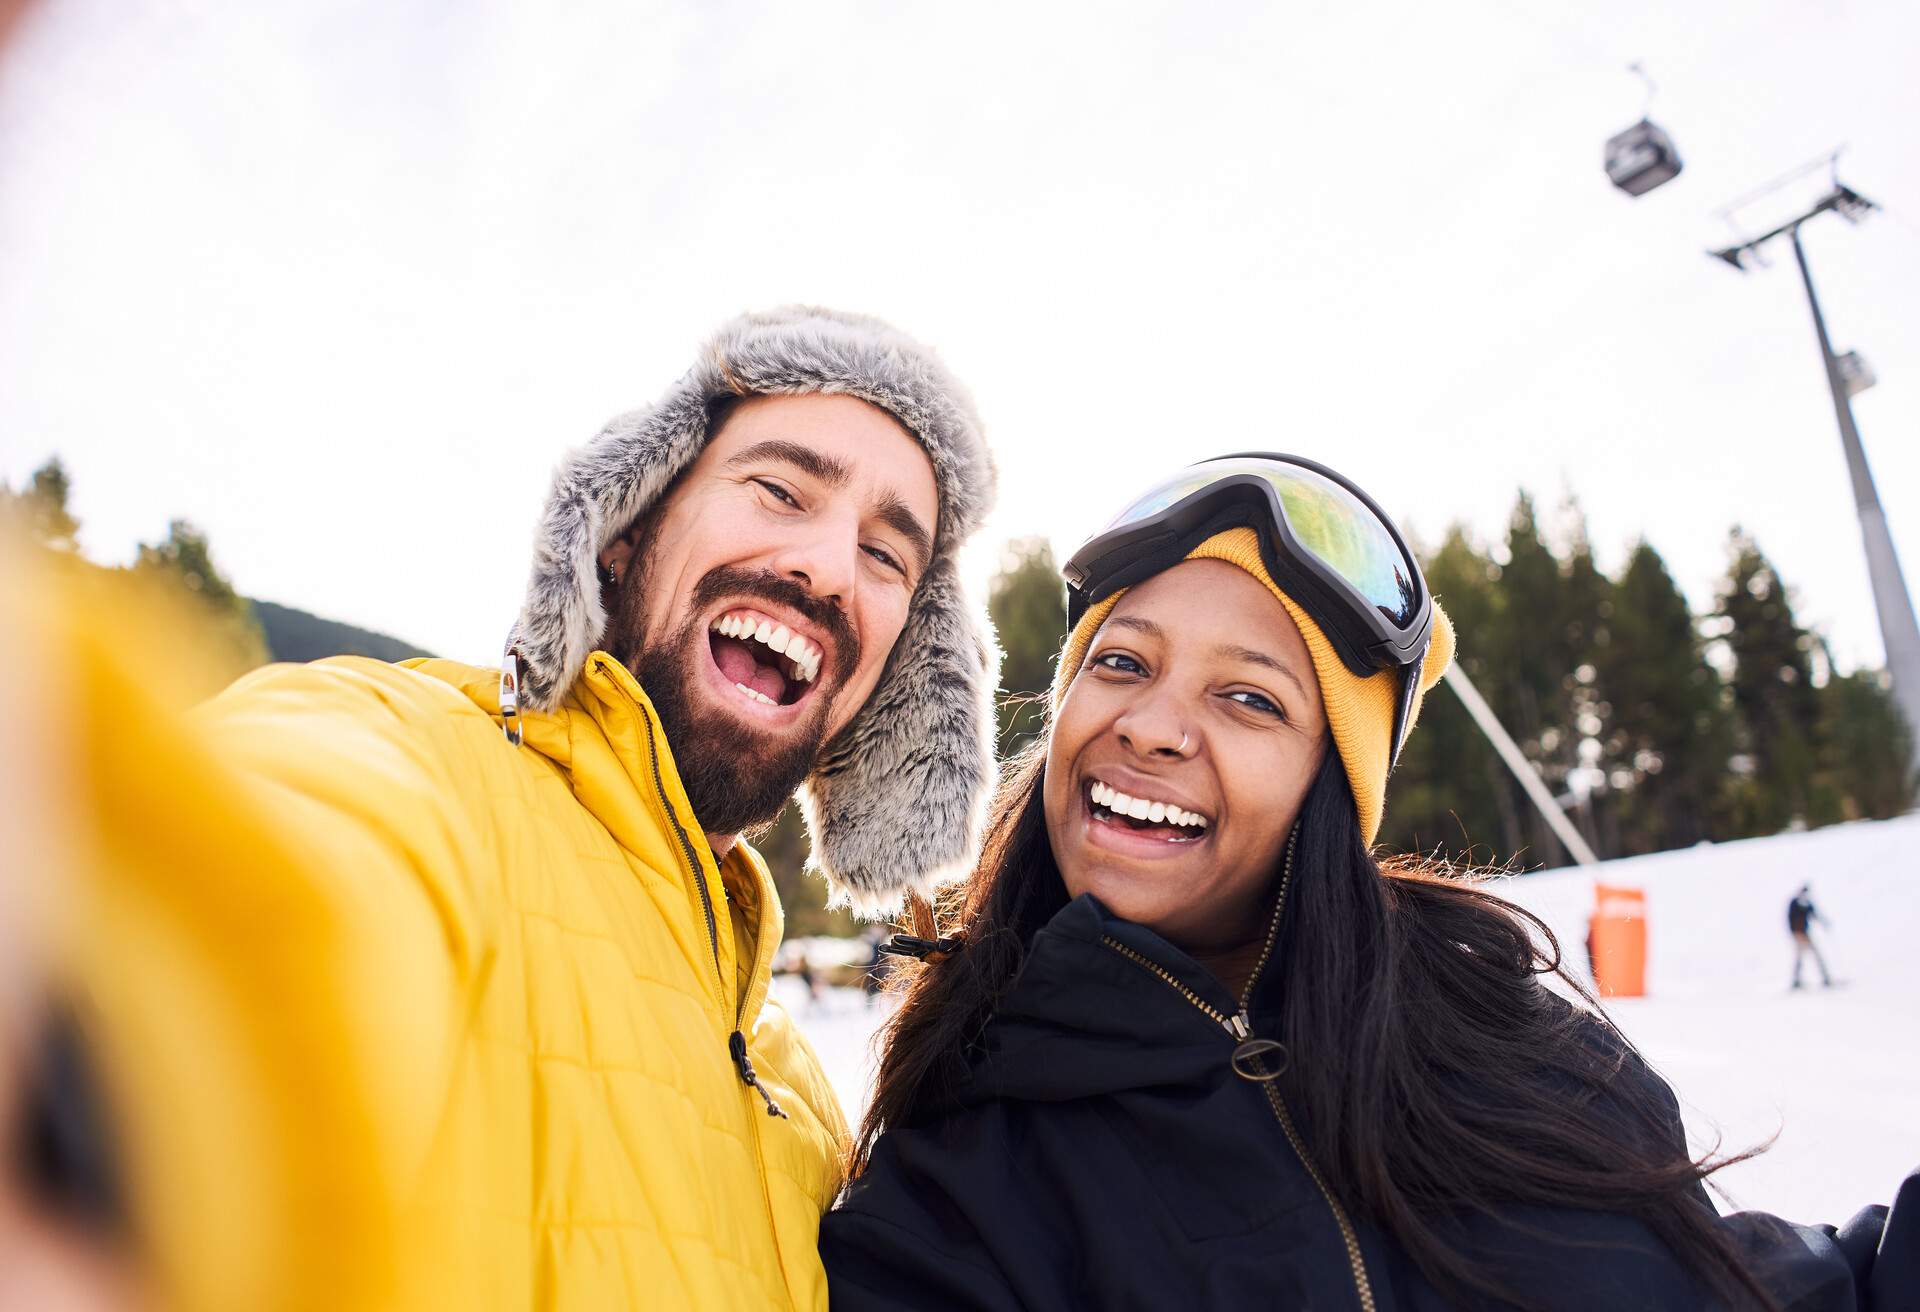 Selfie of a happy young couple in the ski slopes, smiling at camara wearing yellow